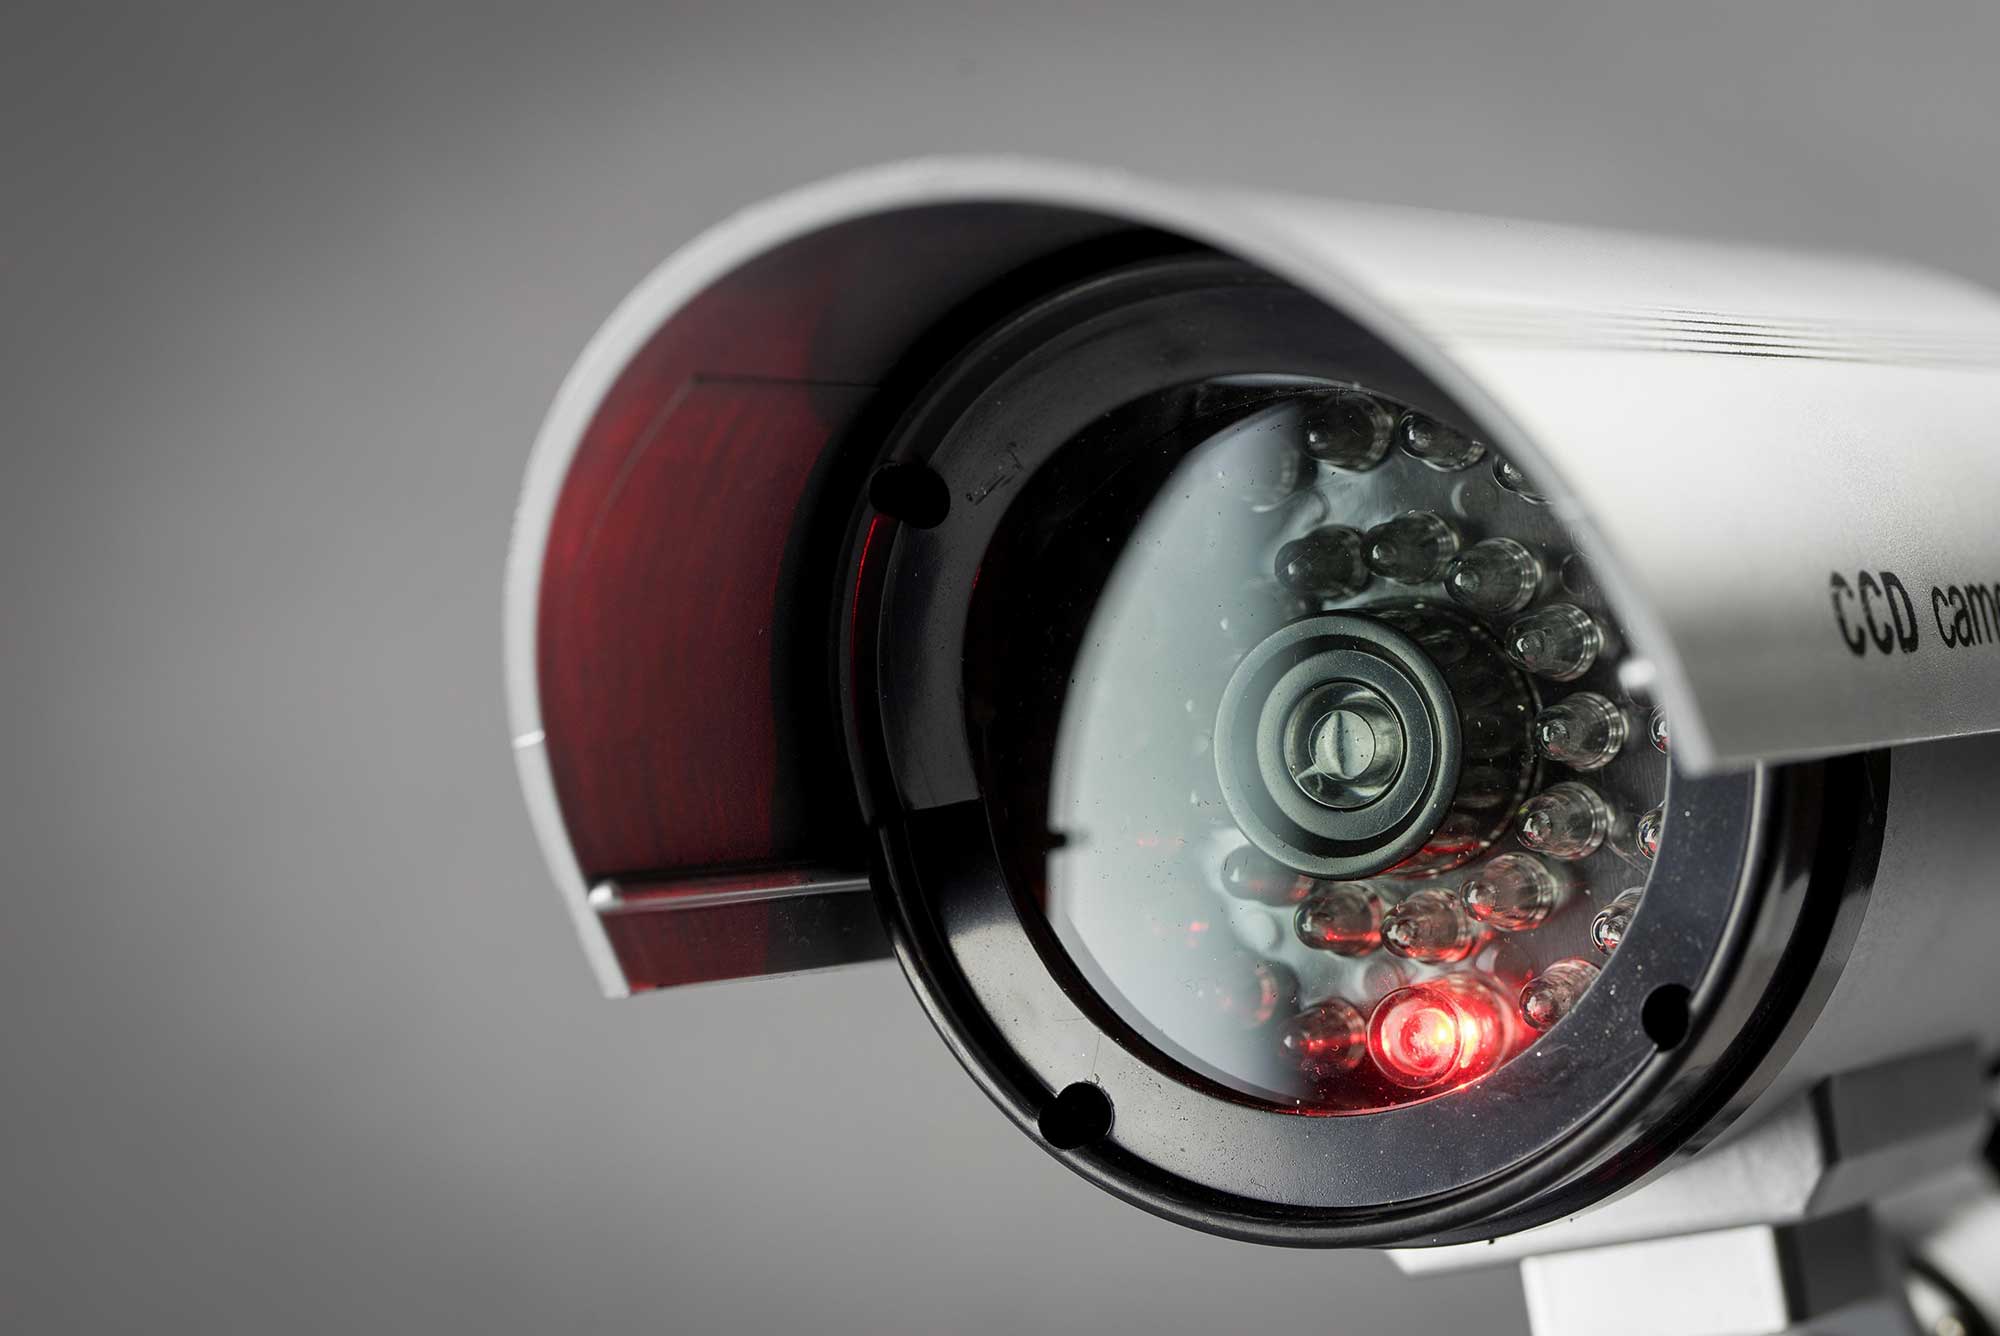 Surveillance CCTV, DVR and Camera solutions with Customusic in Grand Rapids, MI